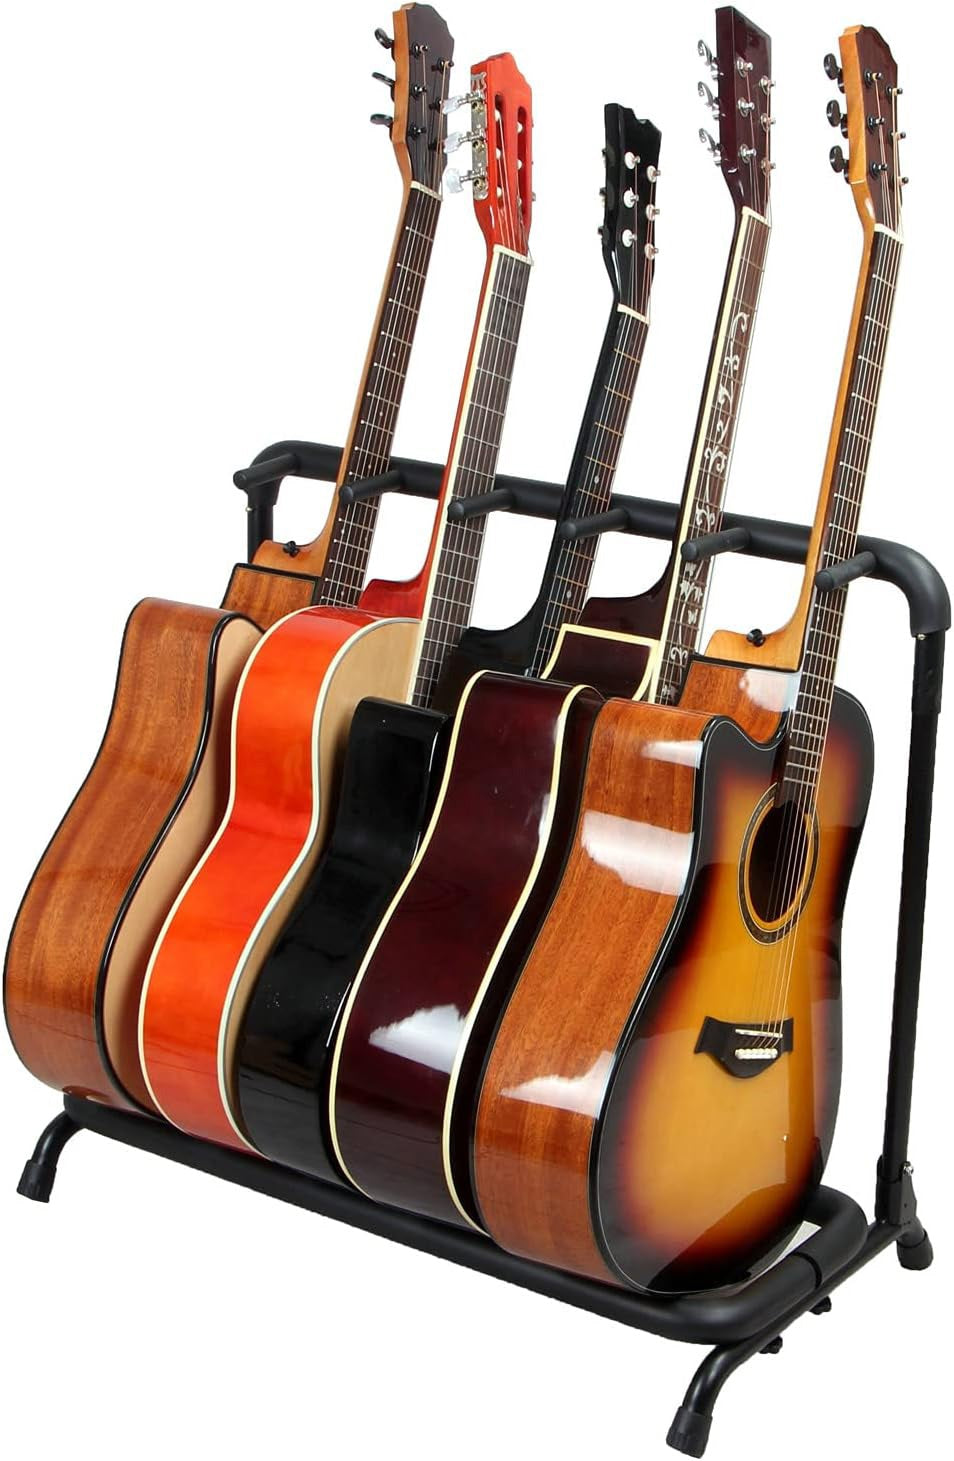 Guitar rack floor stand essential guitar accessories. Accommodate electric acoustic bass flying v guitars.